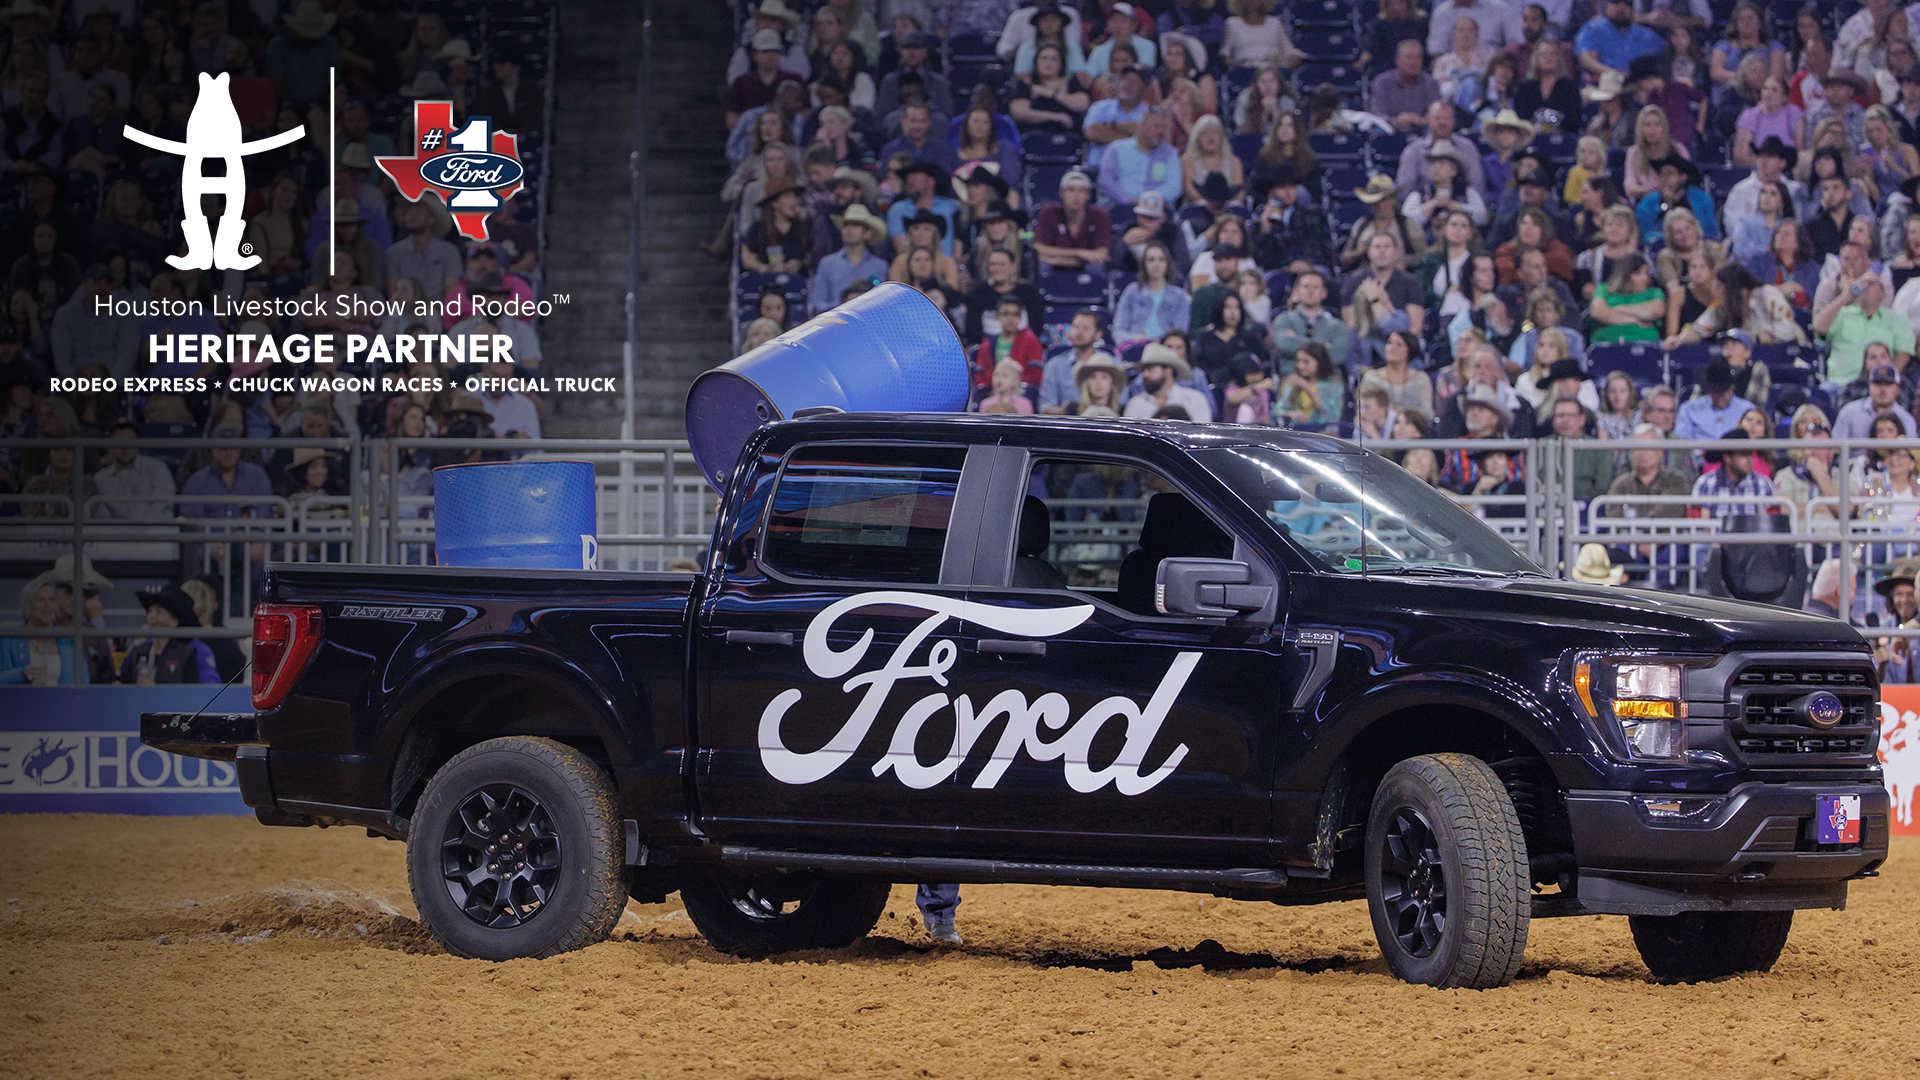 Rodeo announces multi-year sponsorship agreement renewal with Ford